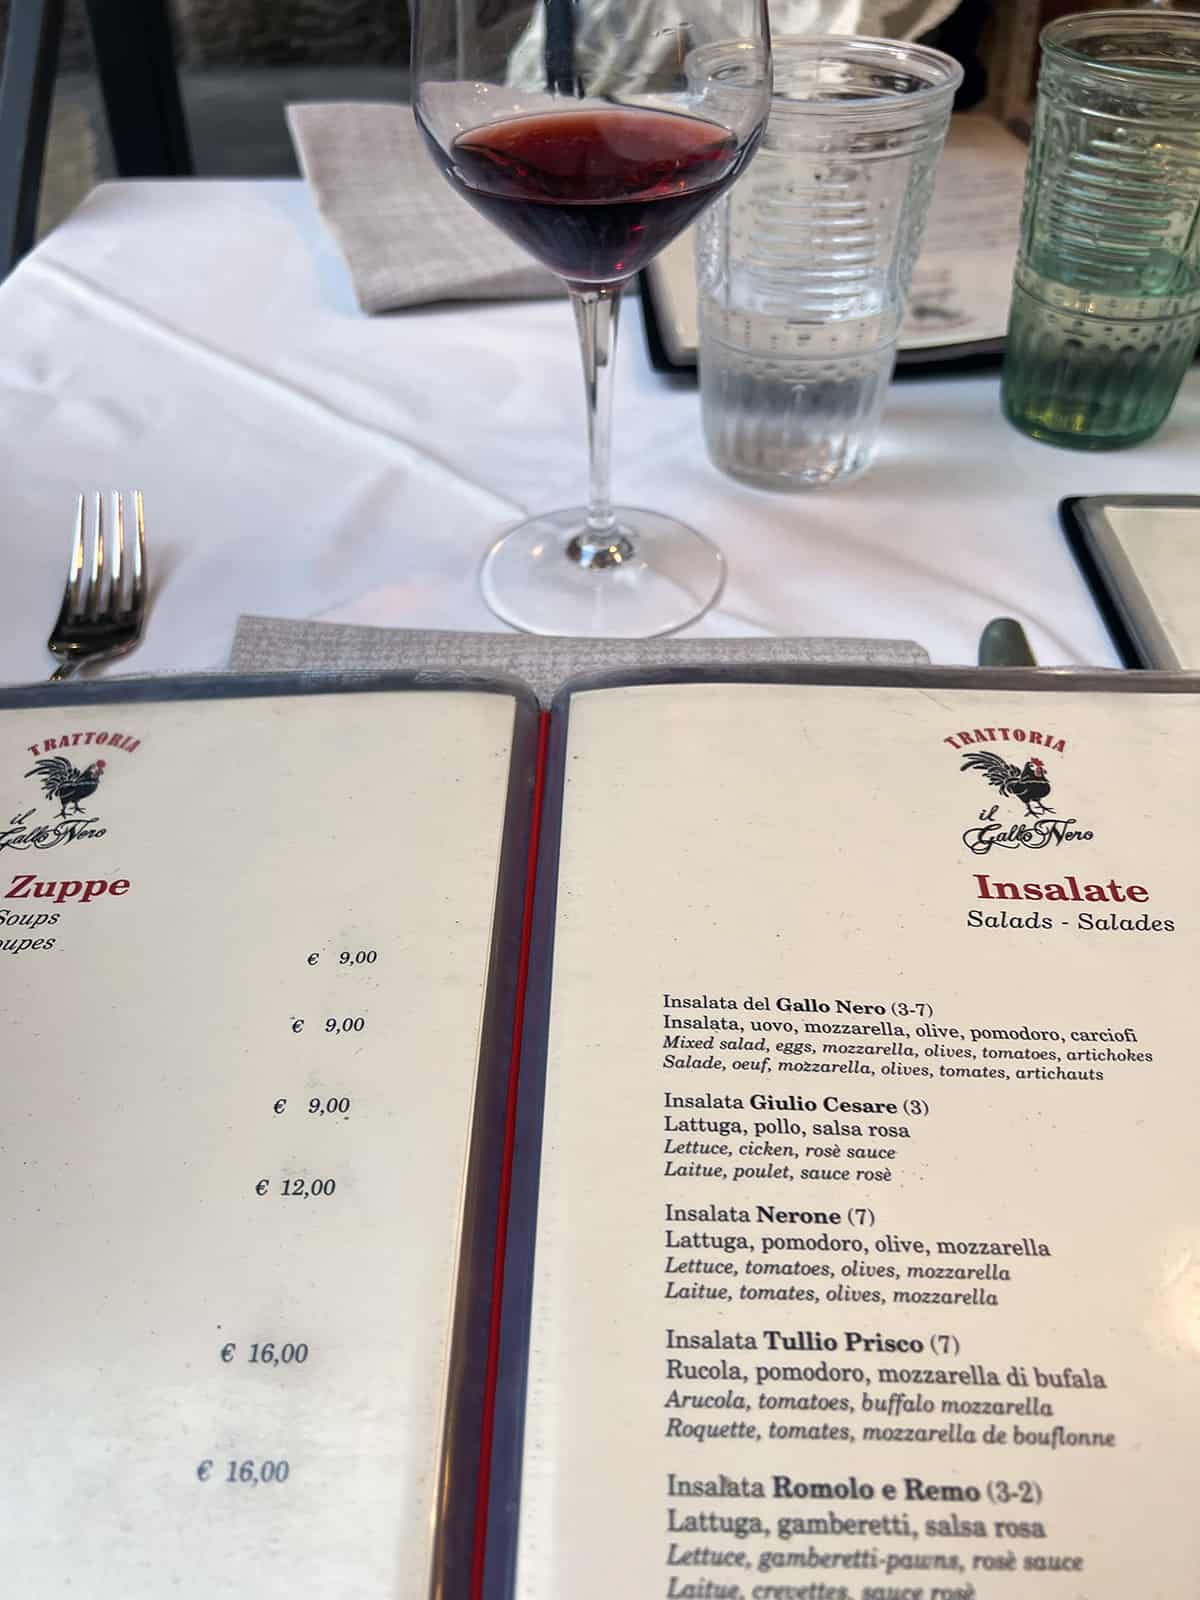 Food menu and glass of wine at a Roman restaurant